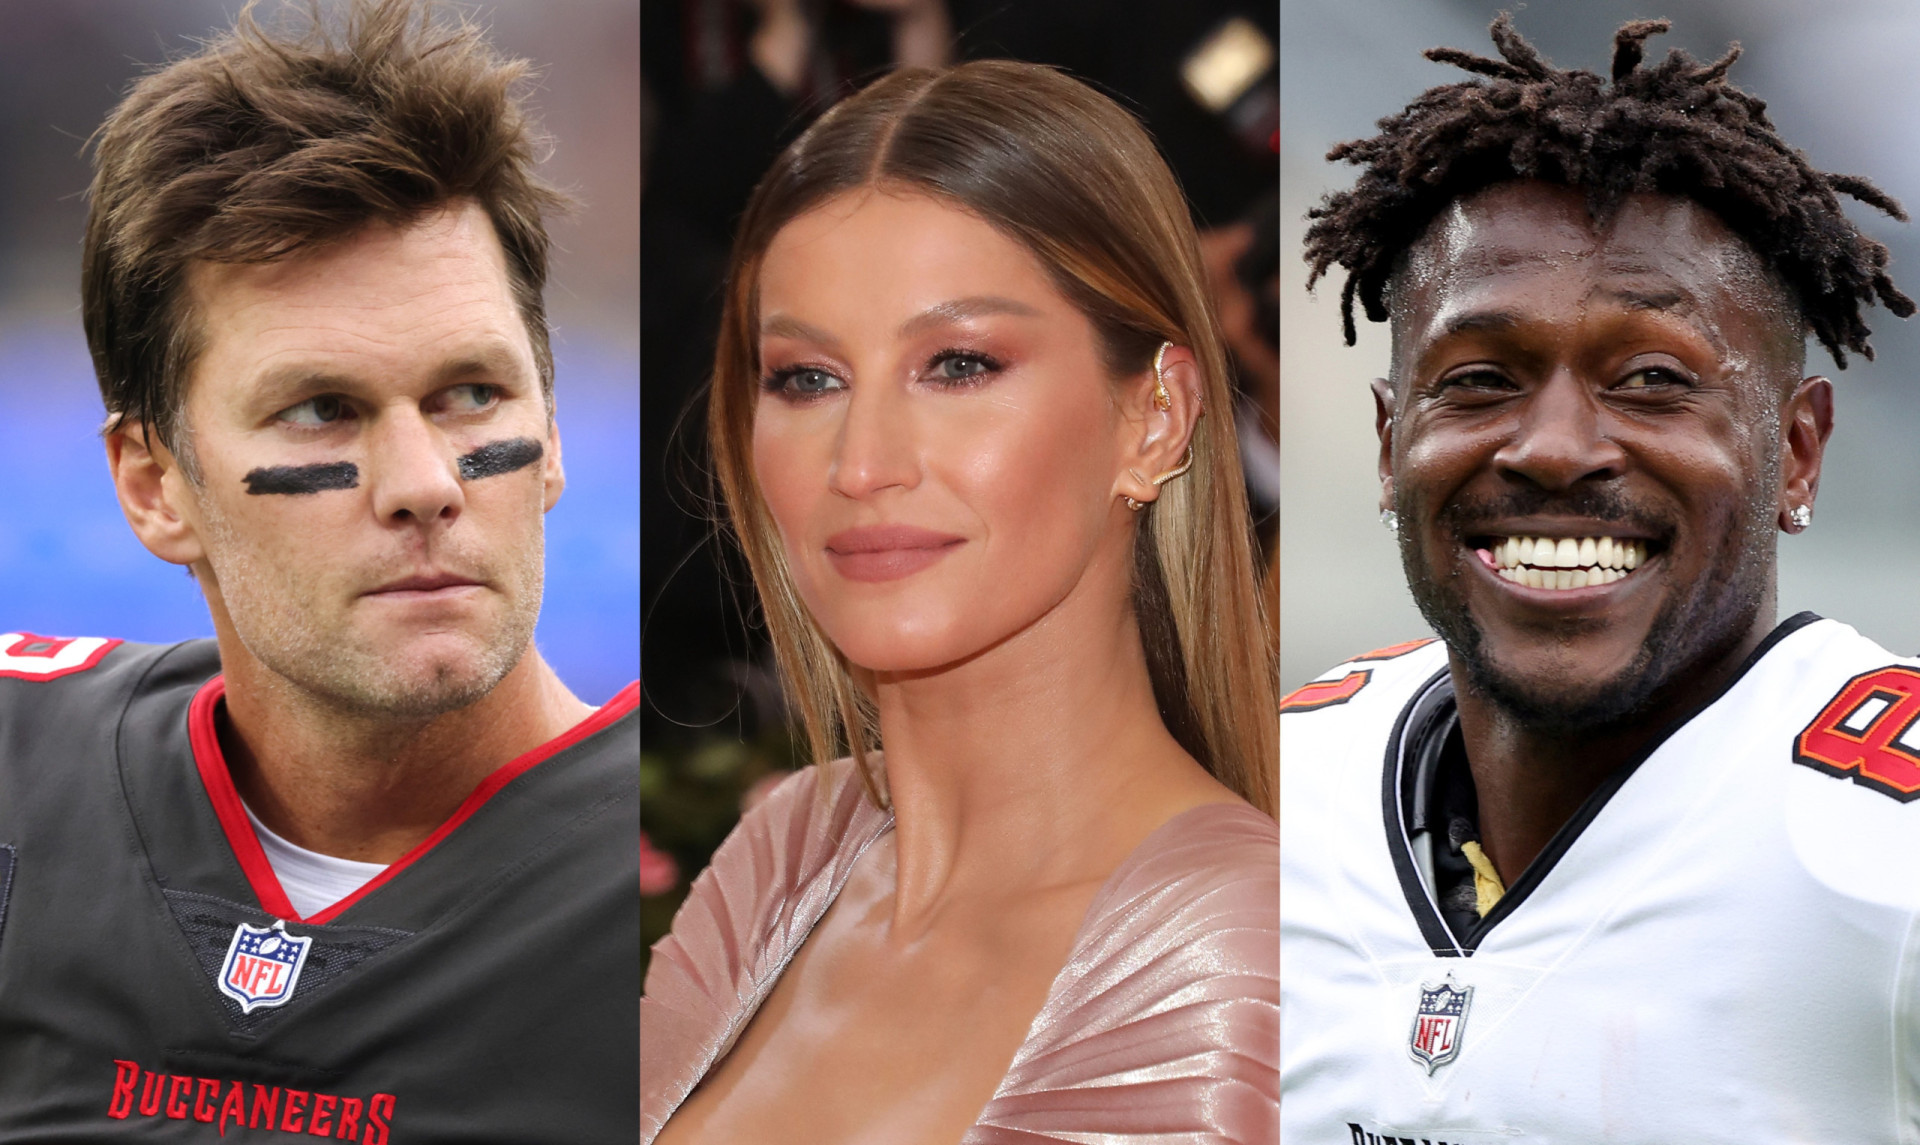 <p>Antonio Brown once again crossed the line in his ongoing feud with Tom Brady, this time by posting a blatantly doctored photo of Gisele Bündchen on social media. The controversial former NFL wide receiver shared an image in which the model's face was edited onto another woman's body on his Snapchat account on November 21, 2022. There was no accompanying caption, leaving it unclear why Brown chose to involve Brady's ex-wife in this publicity stunt. However, the photo was swiftly removed from his profile.<br><br>This incident adds to a series of strange social media attacks against Brady that Brown initiated back in October, right around the time of Brady's divorce. Brown shared a text conversation from 2021 in which the quarterback accused him of behaving like "a young immature man that is selfish, self-serving, irrational, and irresponsible," according to TMZ.</p><p>You may also like:<a href="https://www.starsinsider.com/n/357671?utm_source=msn.com&utm_medium=display&utm_campaign=referral_description&utm_content=570915en-en"> Reality TV secrets that producers won't tell you</a></p>